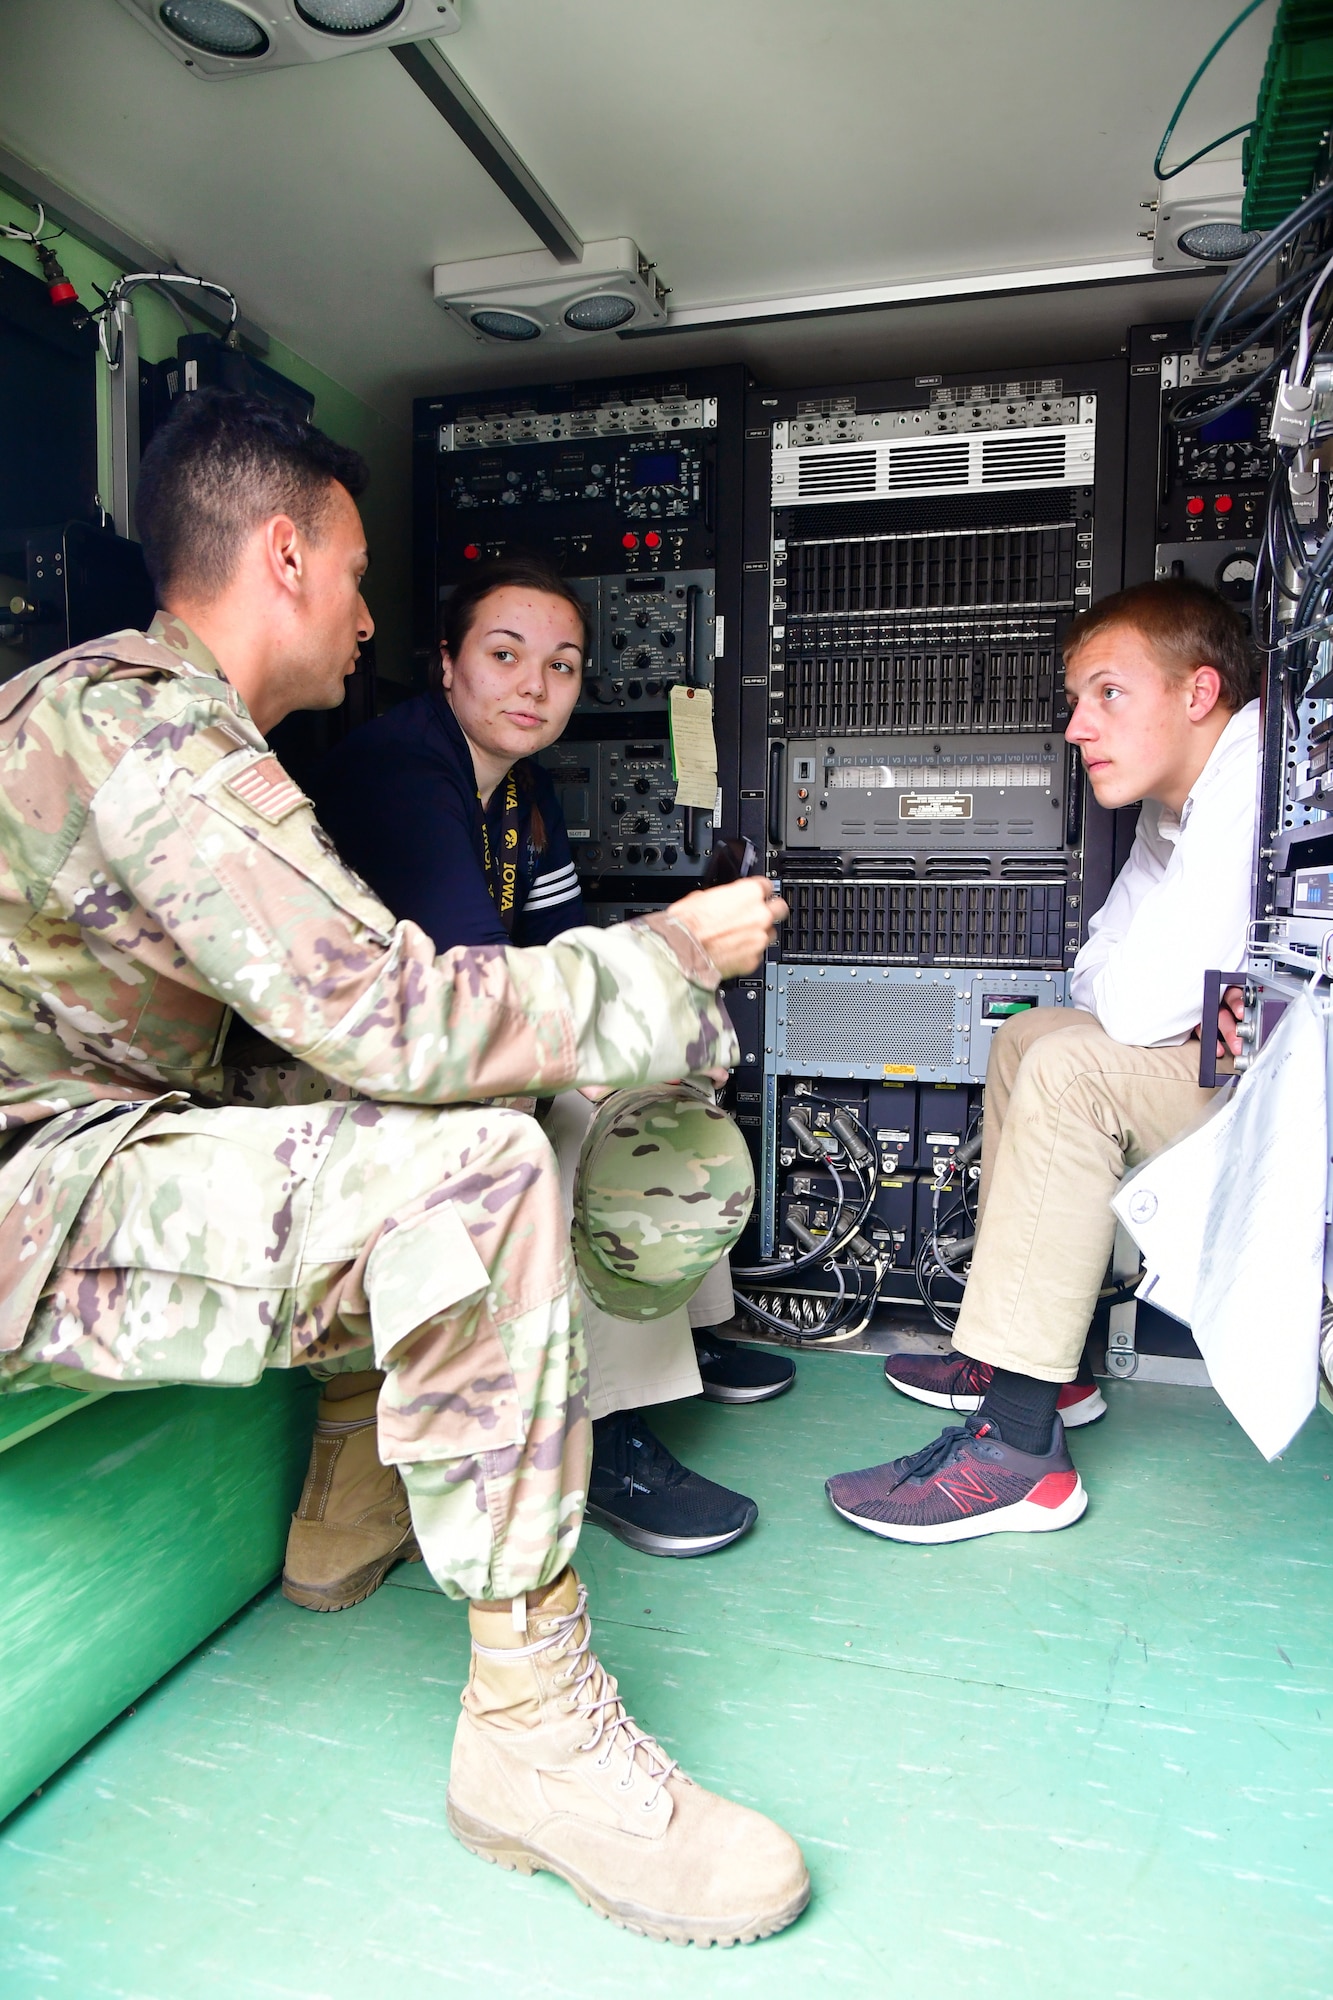 Staff Sgt. Matthew Romero, 729th Air Control Squadron, discusses mobile communications equipment with students during a job fair at the Utah Military Academy, May 25, 2021, in Riverdale, Utah. Airmen from Hill Air Force Base recently hosted the event at the nearby charter high school to educate and inspire students, as well as promote interest in the possibility of future military careers. (U.S. Air Force photo by Todd Cromar)